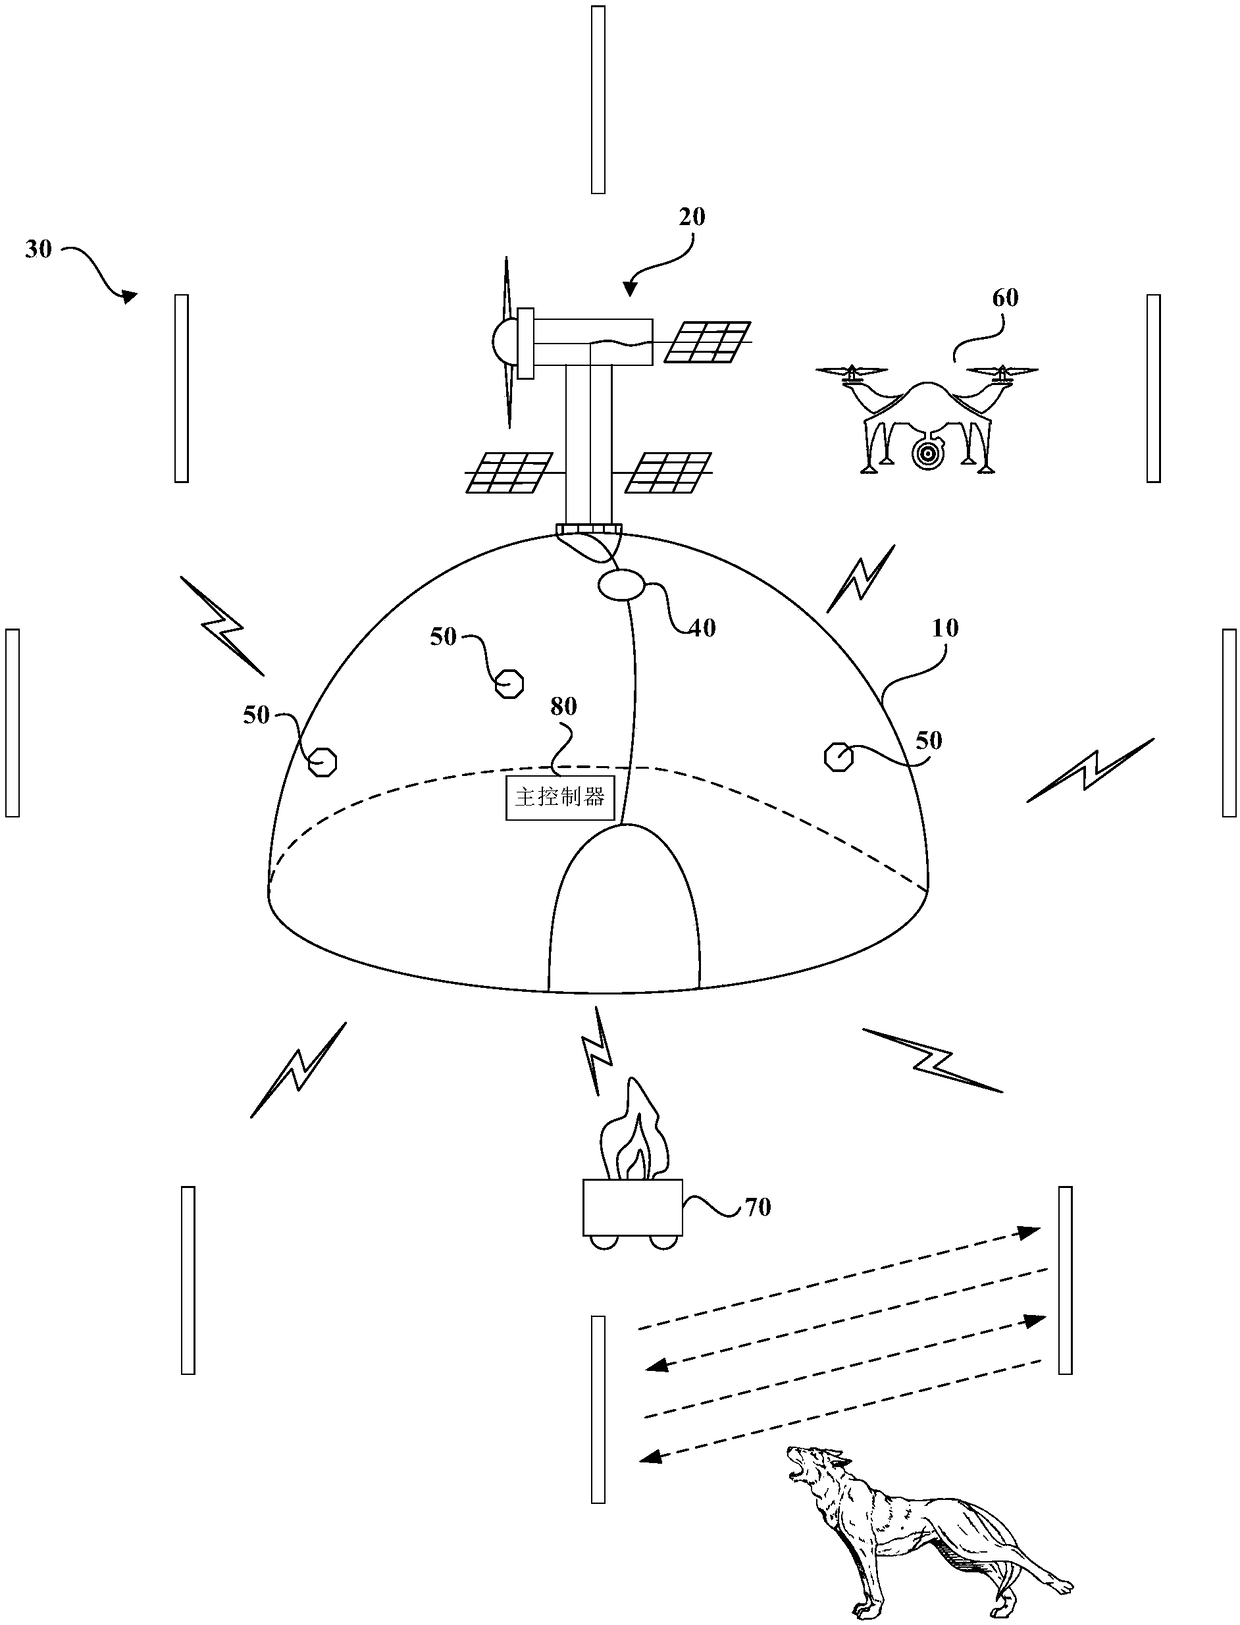 Invasion preventing method for outdoor intelligent tent system based on clean energy and unmanned aerial vehicle